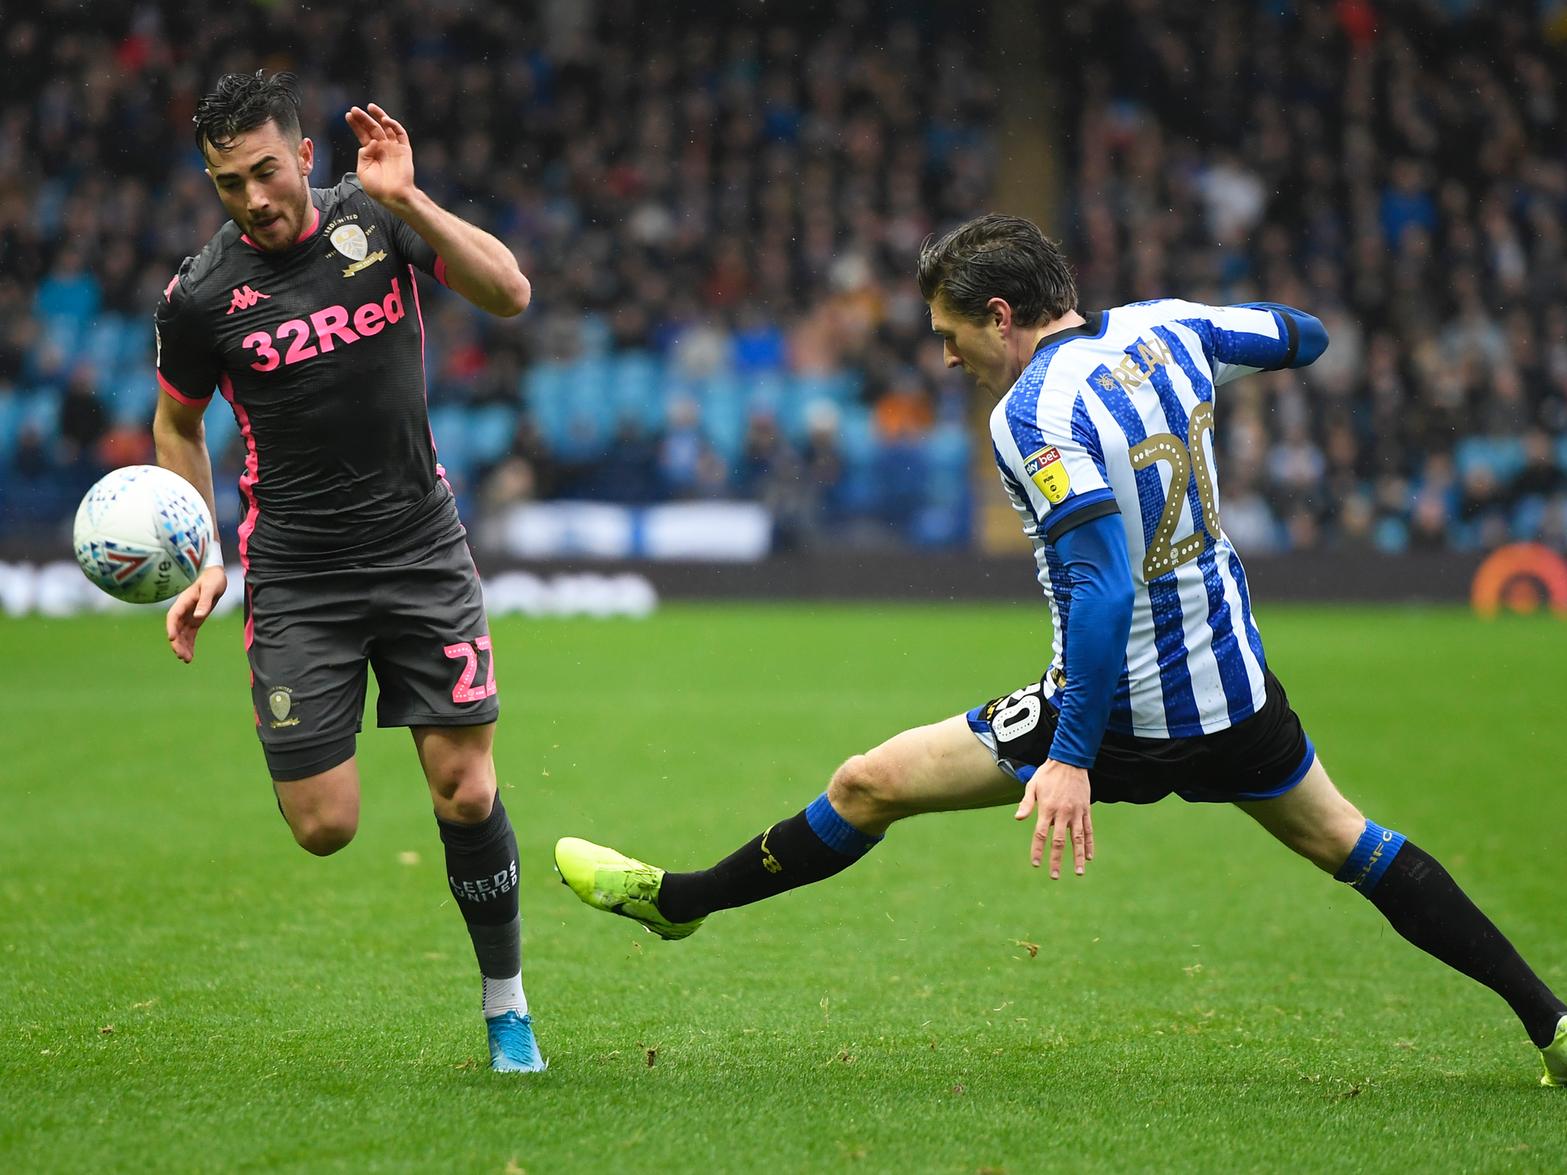 Leeds United winger Jack Harrison in action against Sheffield Wednesday. (Getty)